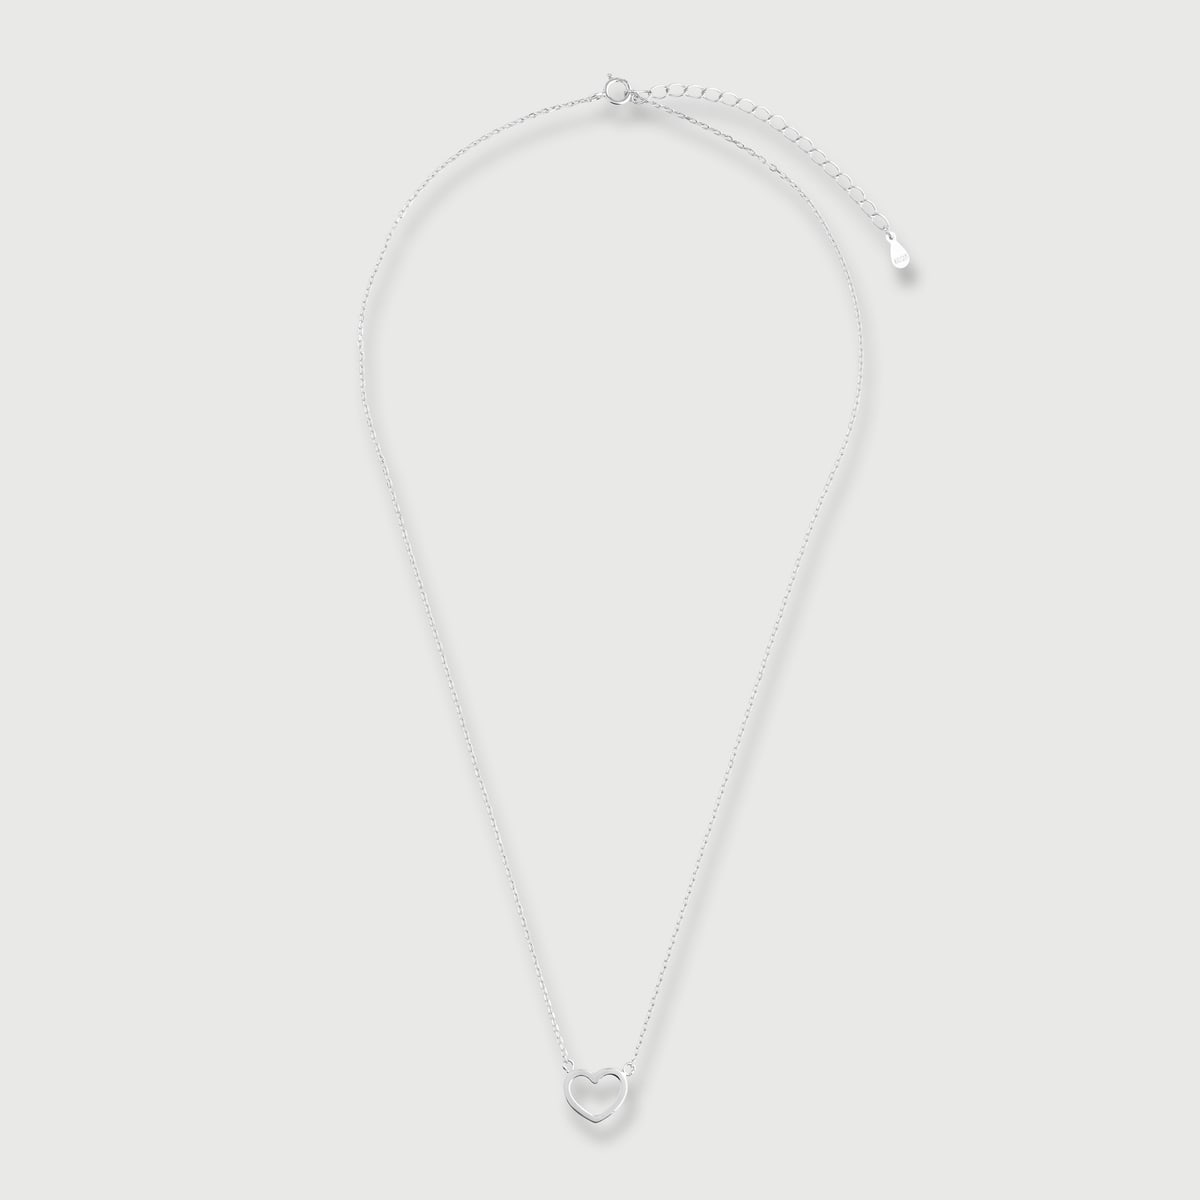 Sterling Silver Heart Necklace - Kmart